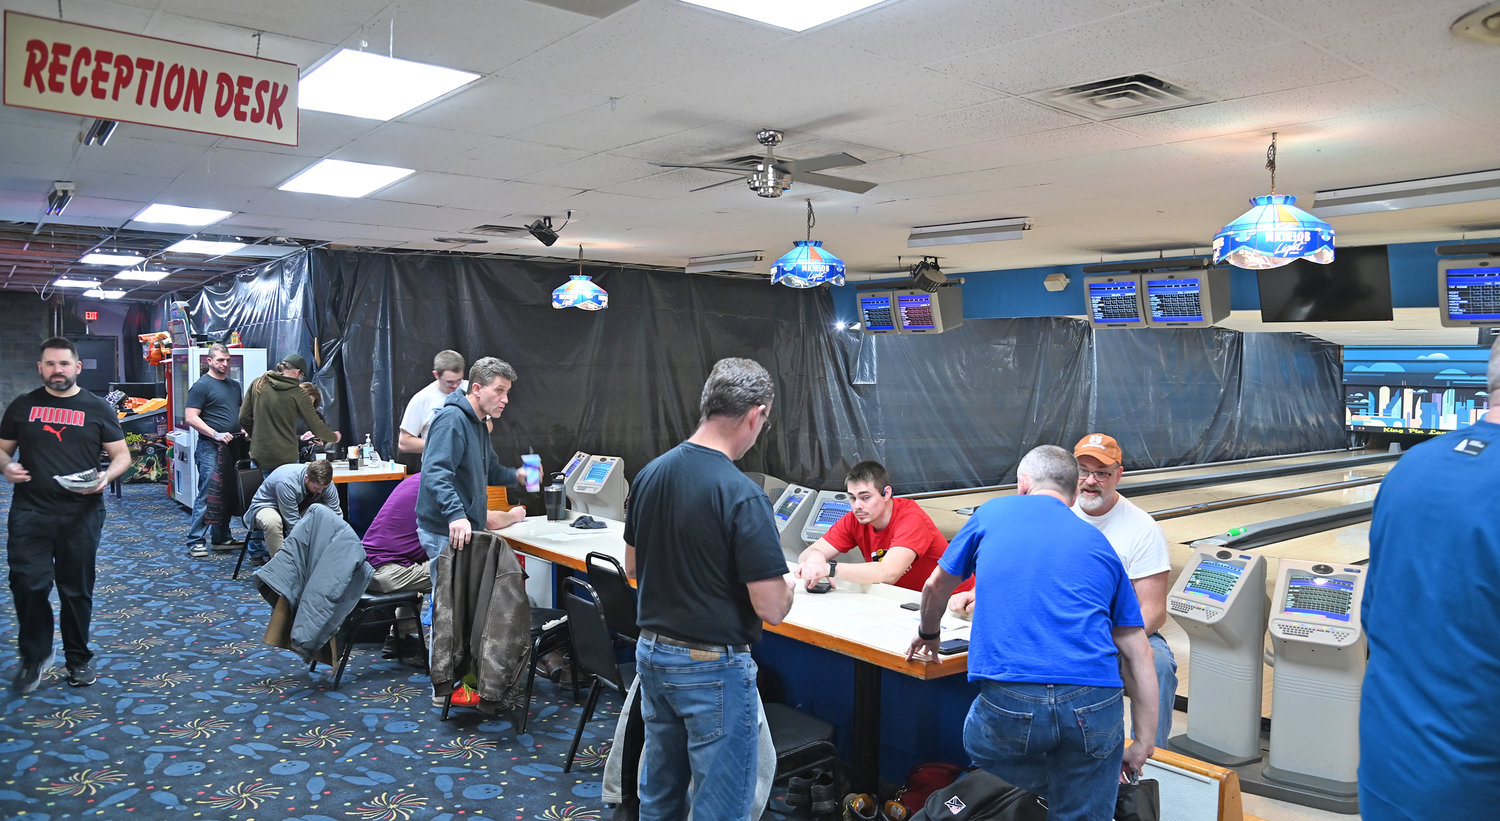 At King Pin Lanes on East Dominick Street in Rome, plastic is put up around the old lanes that are being turned into an arcade and games area. Craig Vogel, the owner, said that the new arcade area will open in the spring.